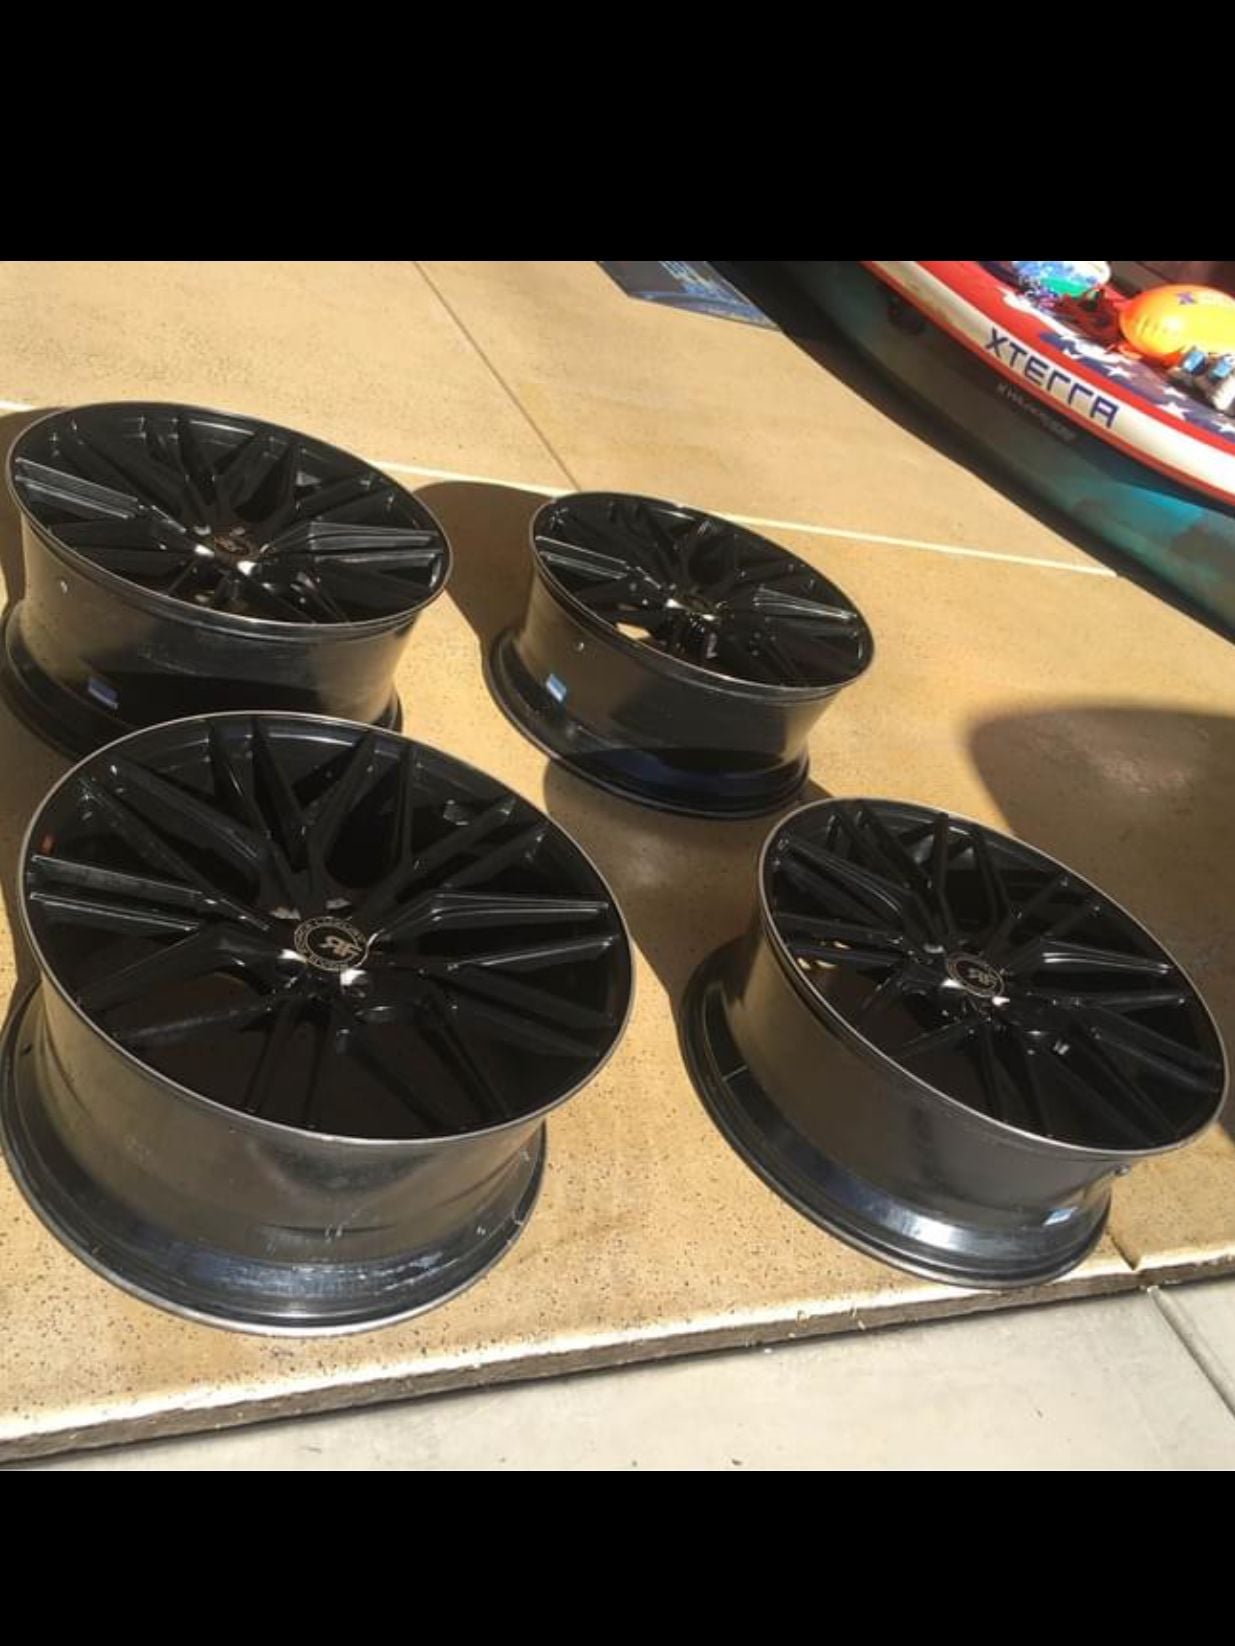 Accessories - 22”   Road force rf13   Phoenix area - Used - 0  All Models - San Tan Valley, AZ 85143, United States